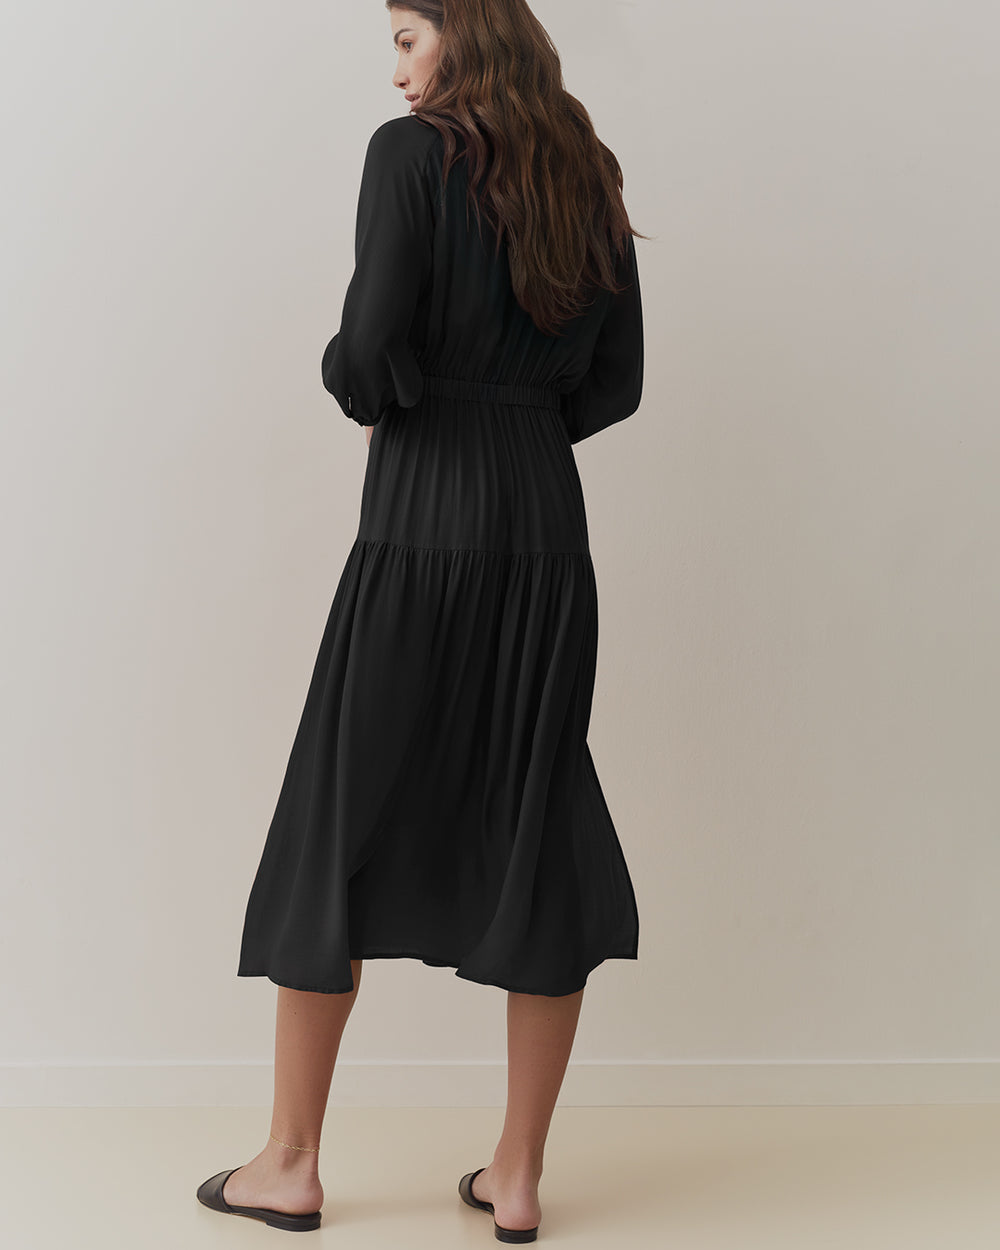 Woman in long-sleeved dress standing, viewed from behind.